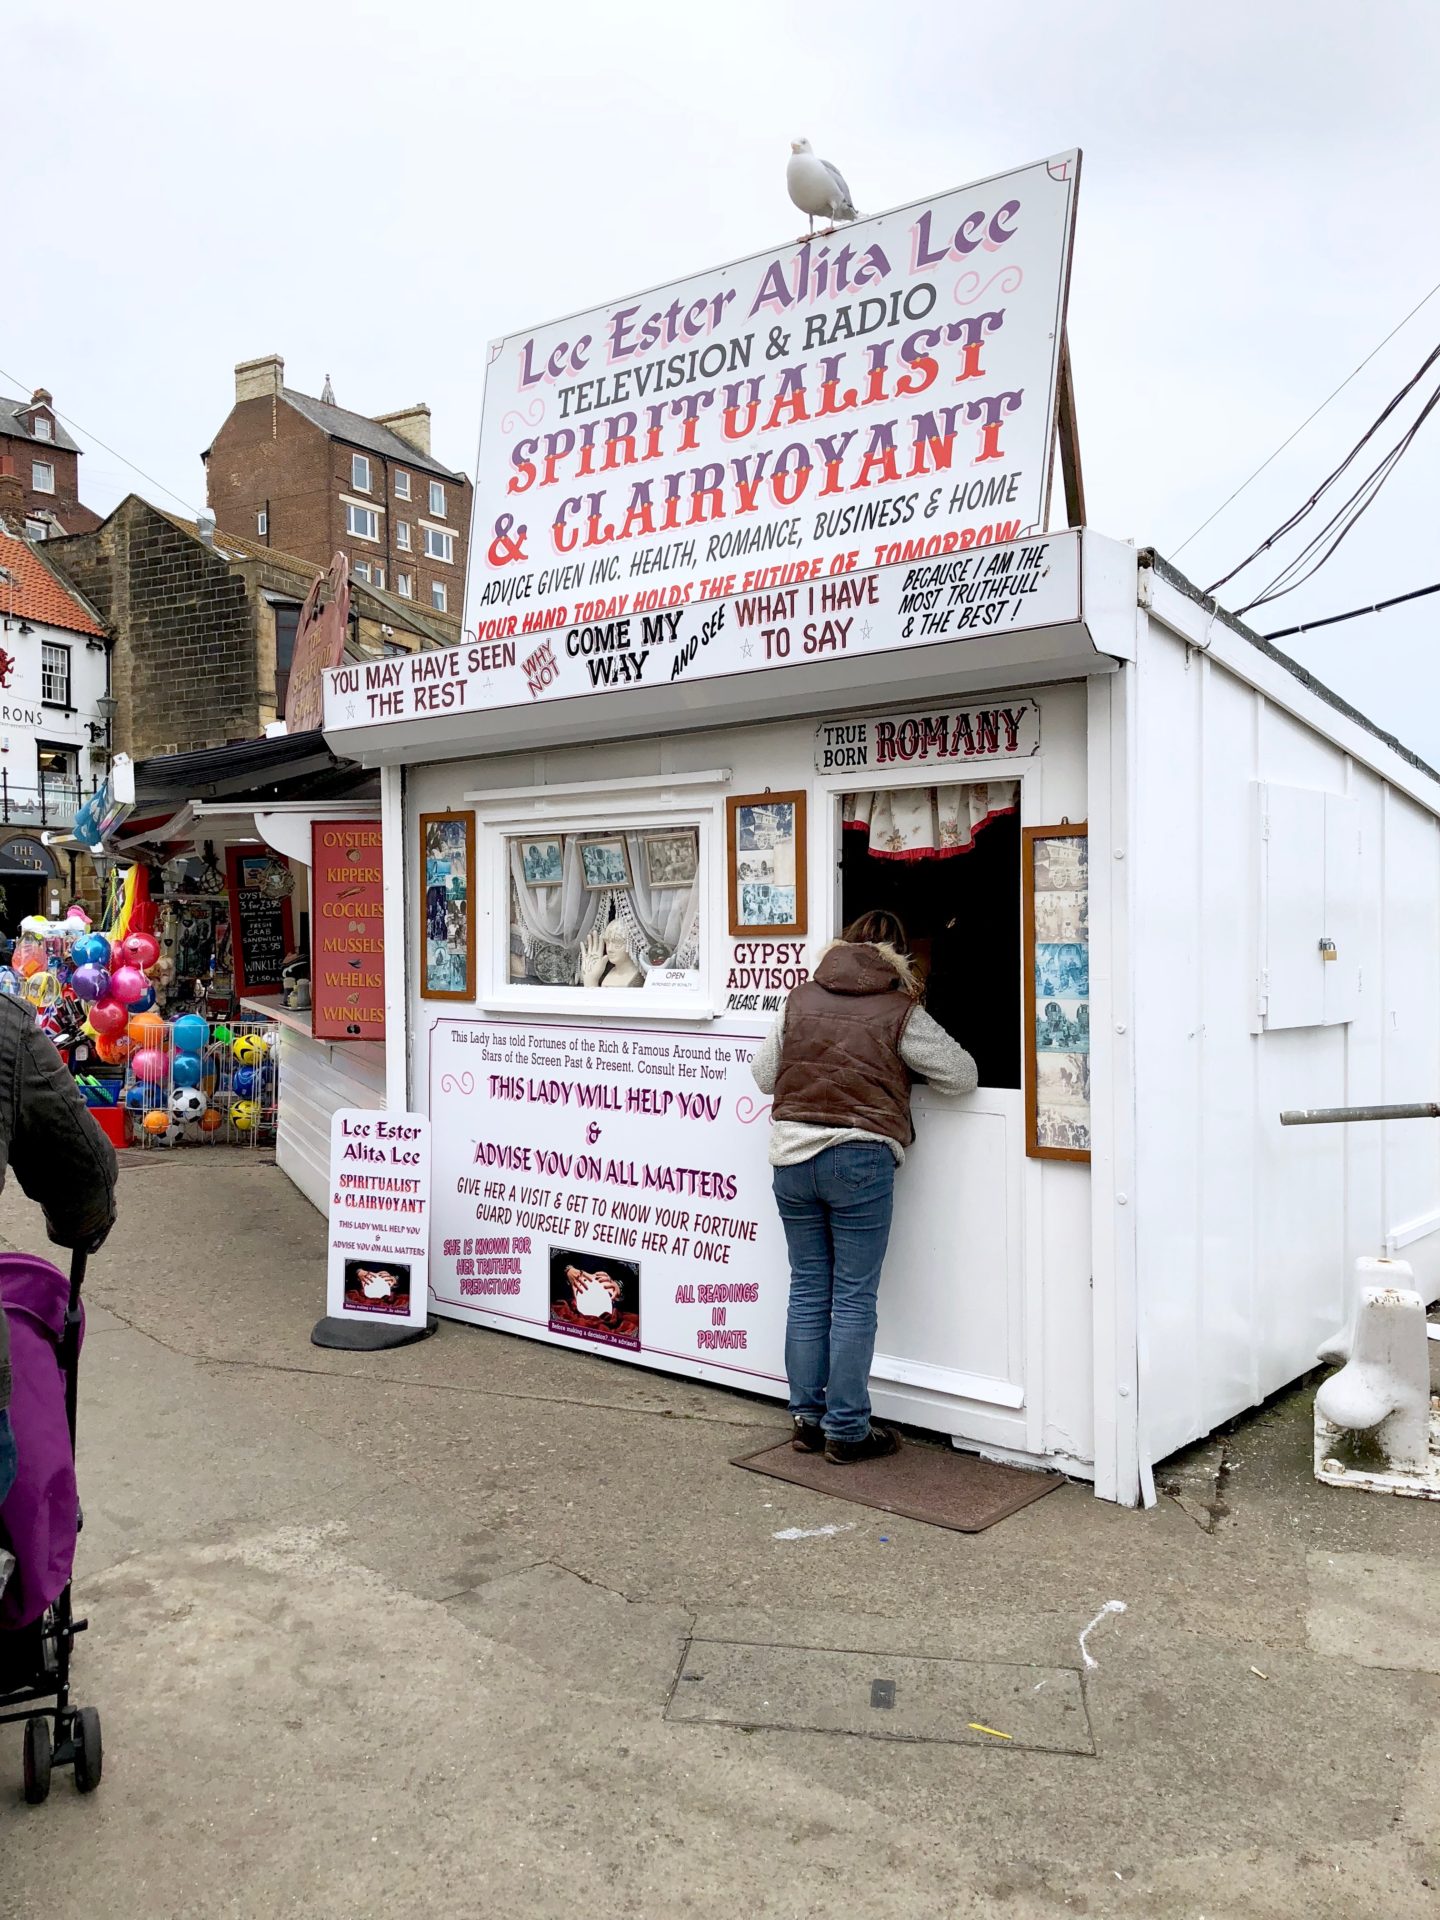 What To Do In Whitby with Kids - Ever After With Kids